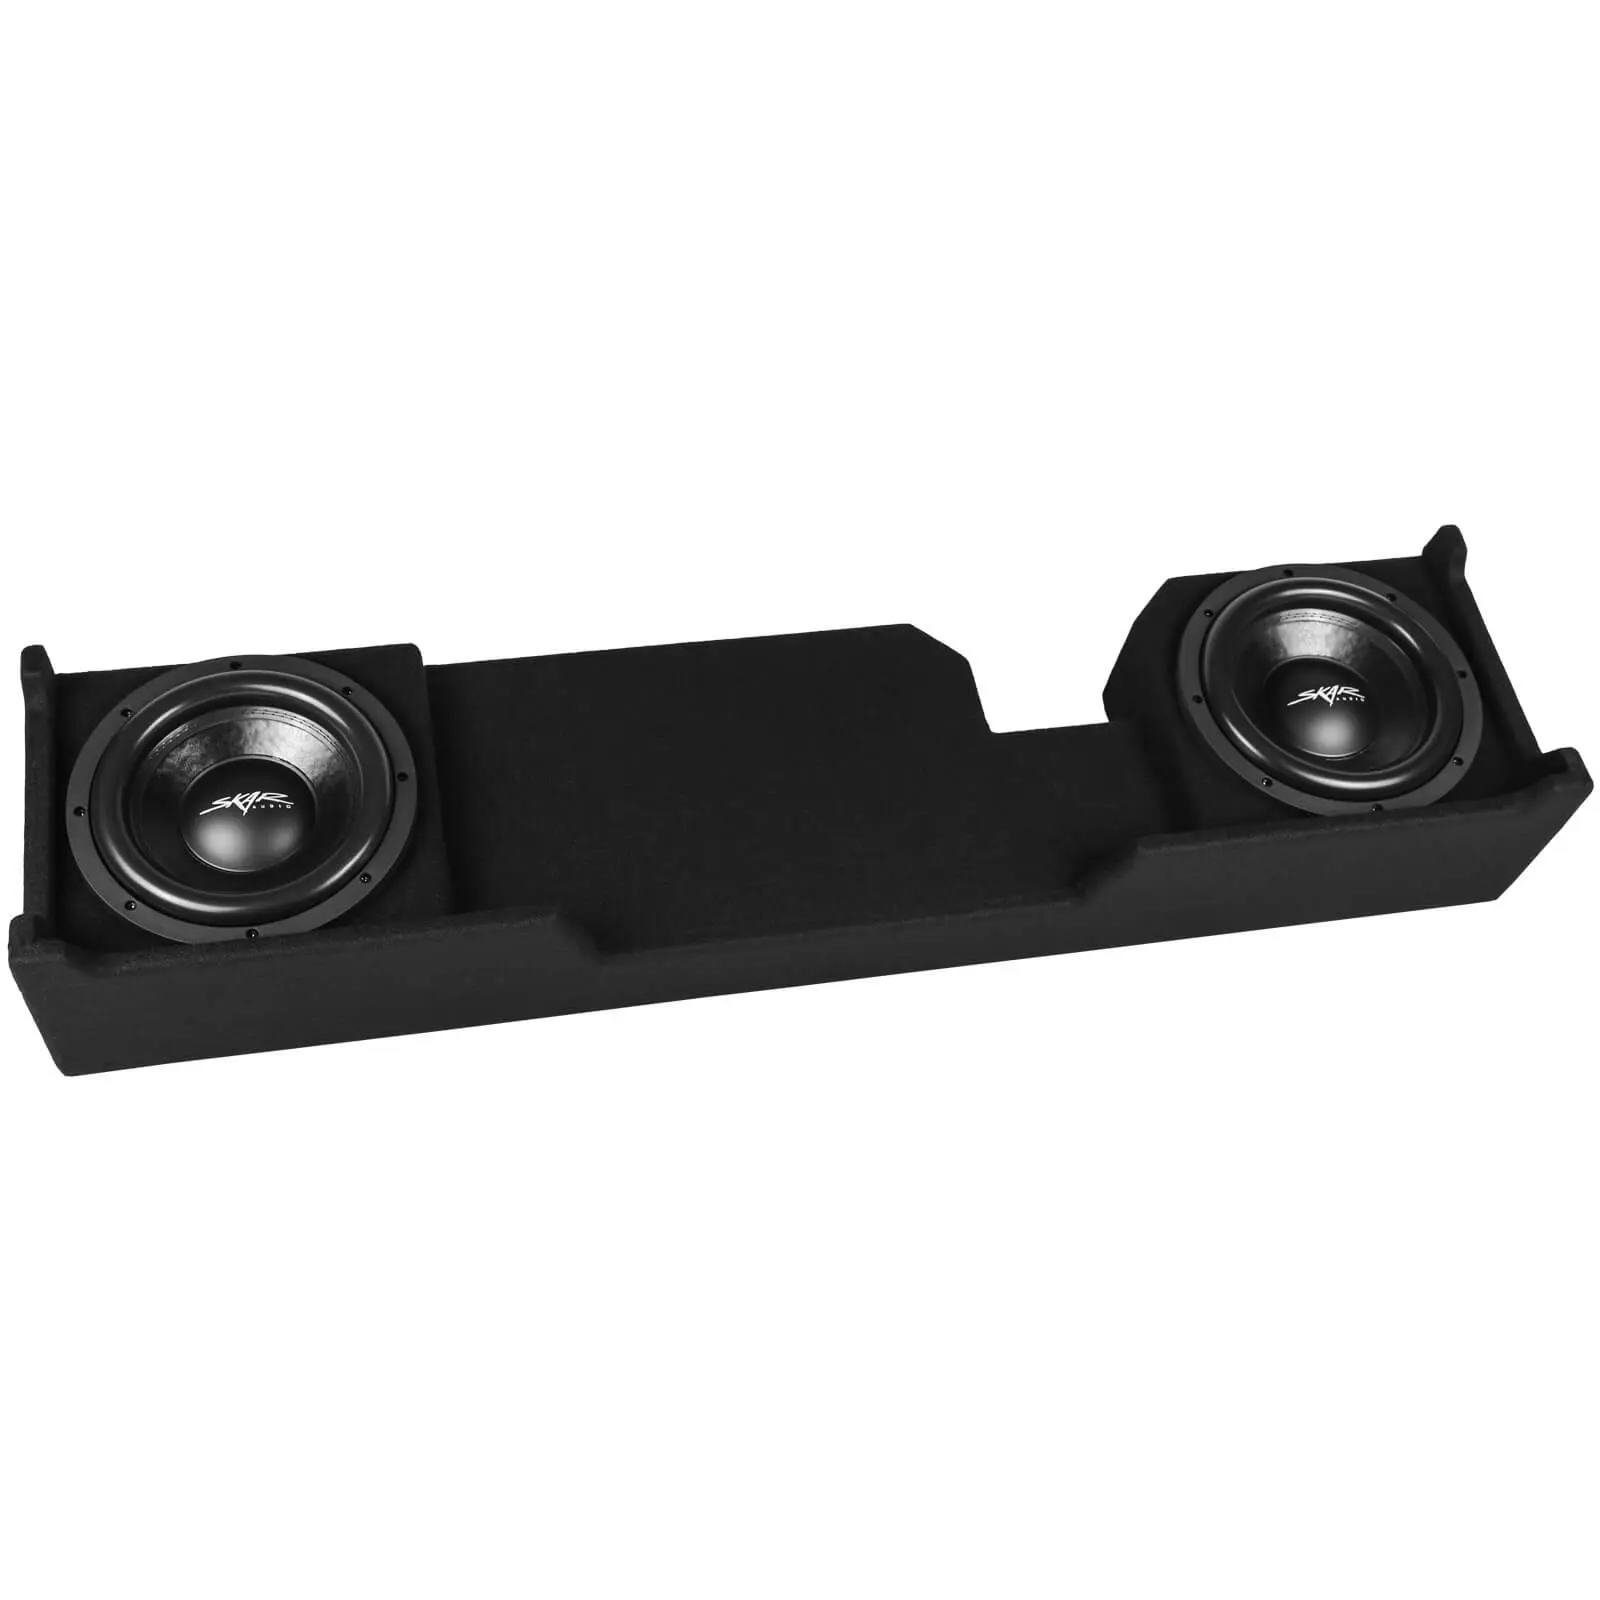 Dual 10" 1,600W Max Power Loaded Subwoofer Enclosure Compatible with 2004-2008 Ford F-150 Super Cab Trucks #1